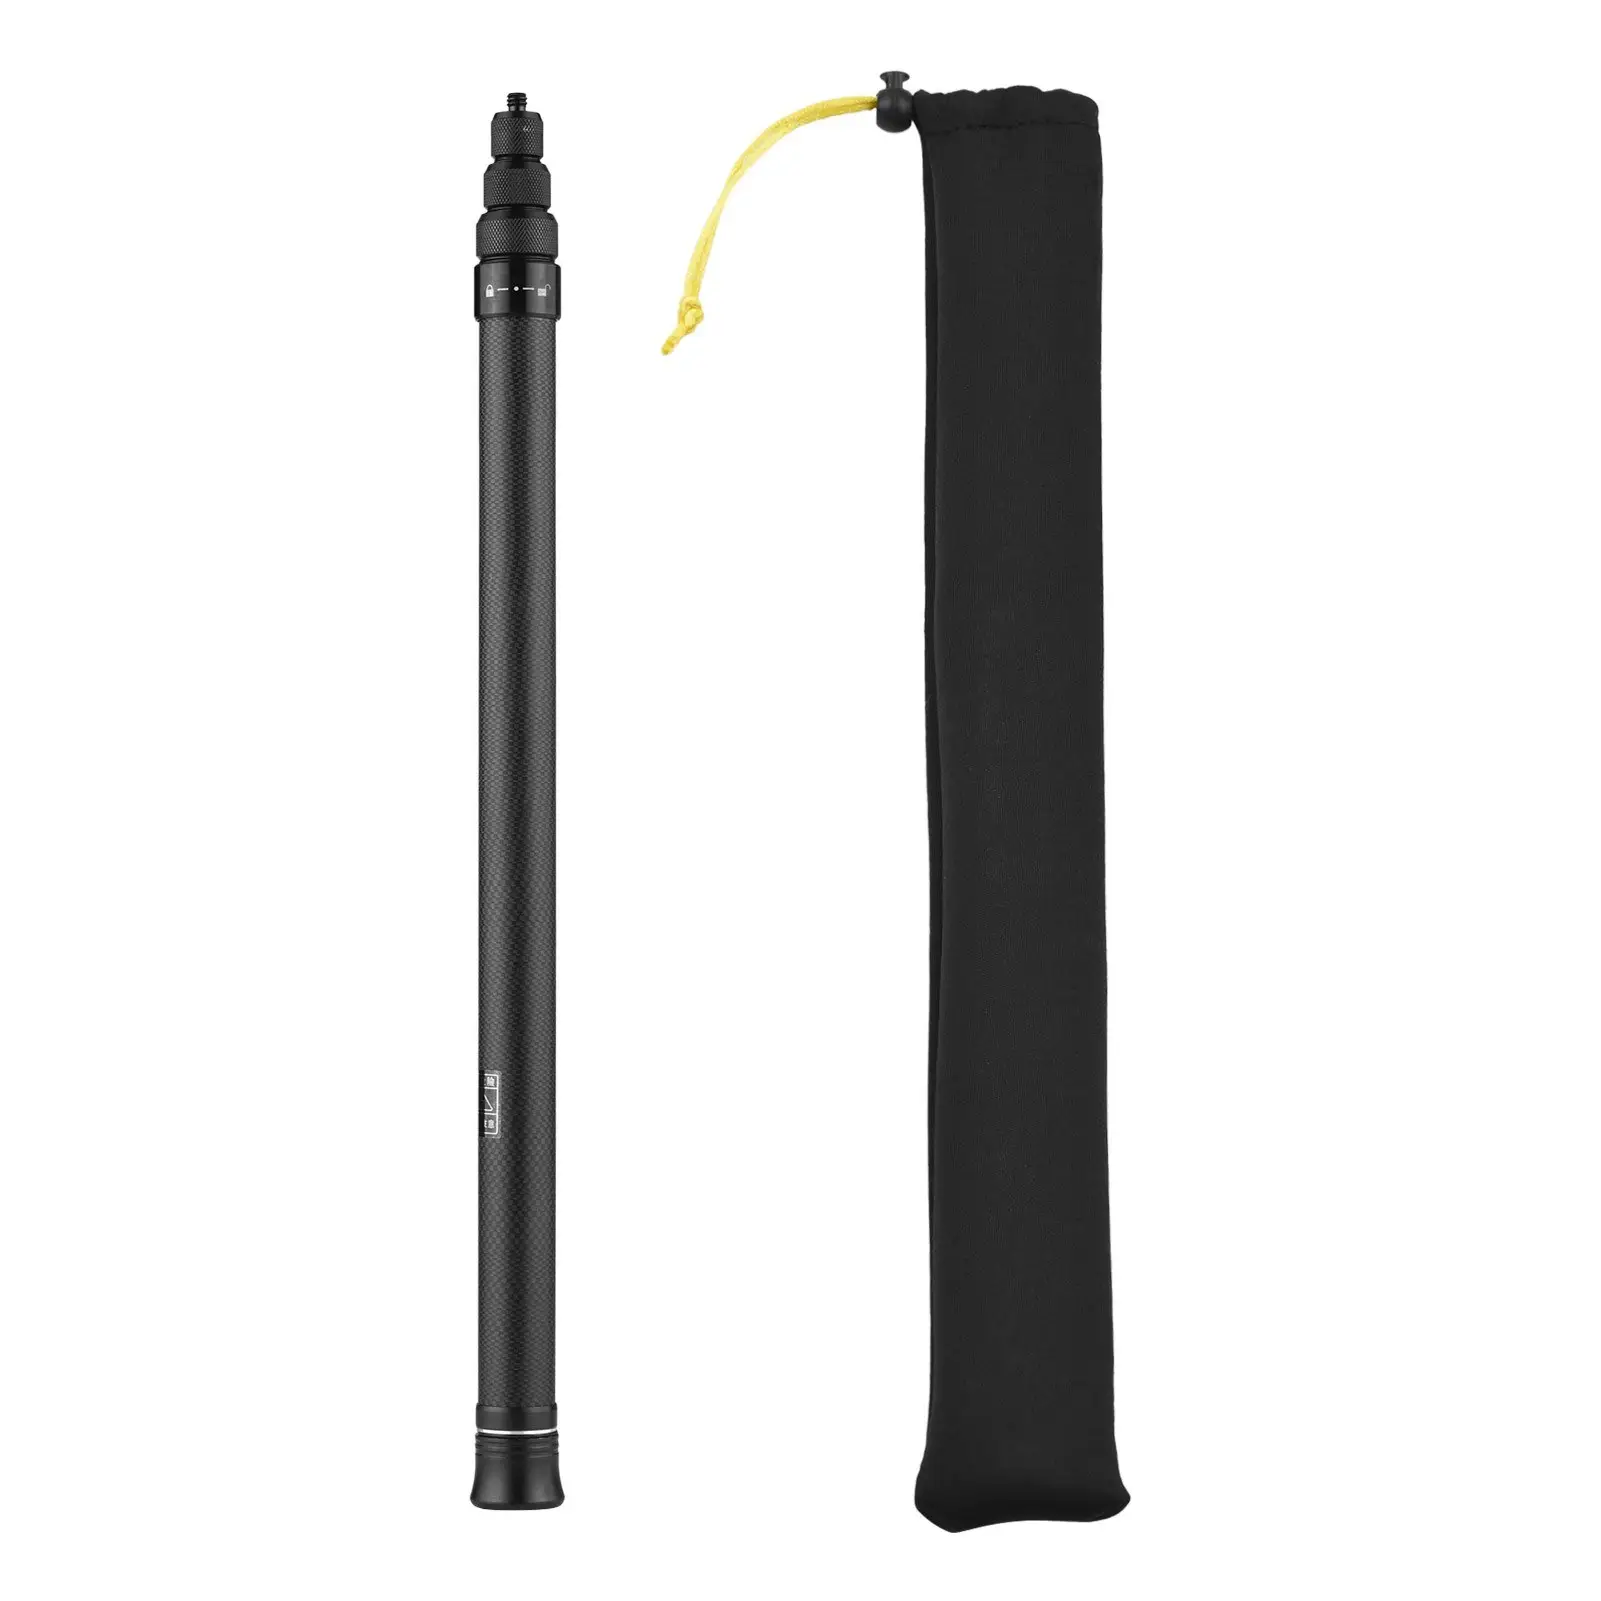 1.5m/ 4.9ft Carbon Fiber Selfie Stick Adjustable Extension Pole with 1/4 Inch Screw Replacement for Insta 360 One X/ One X2/ One